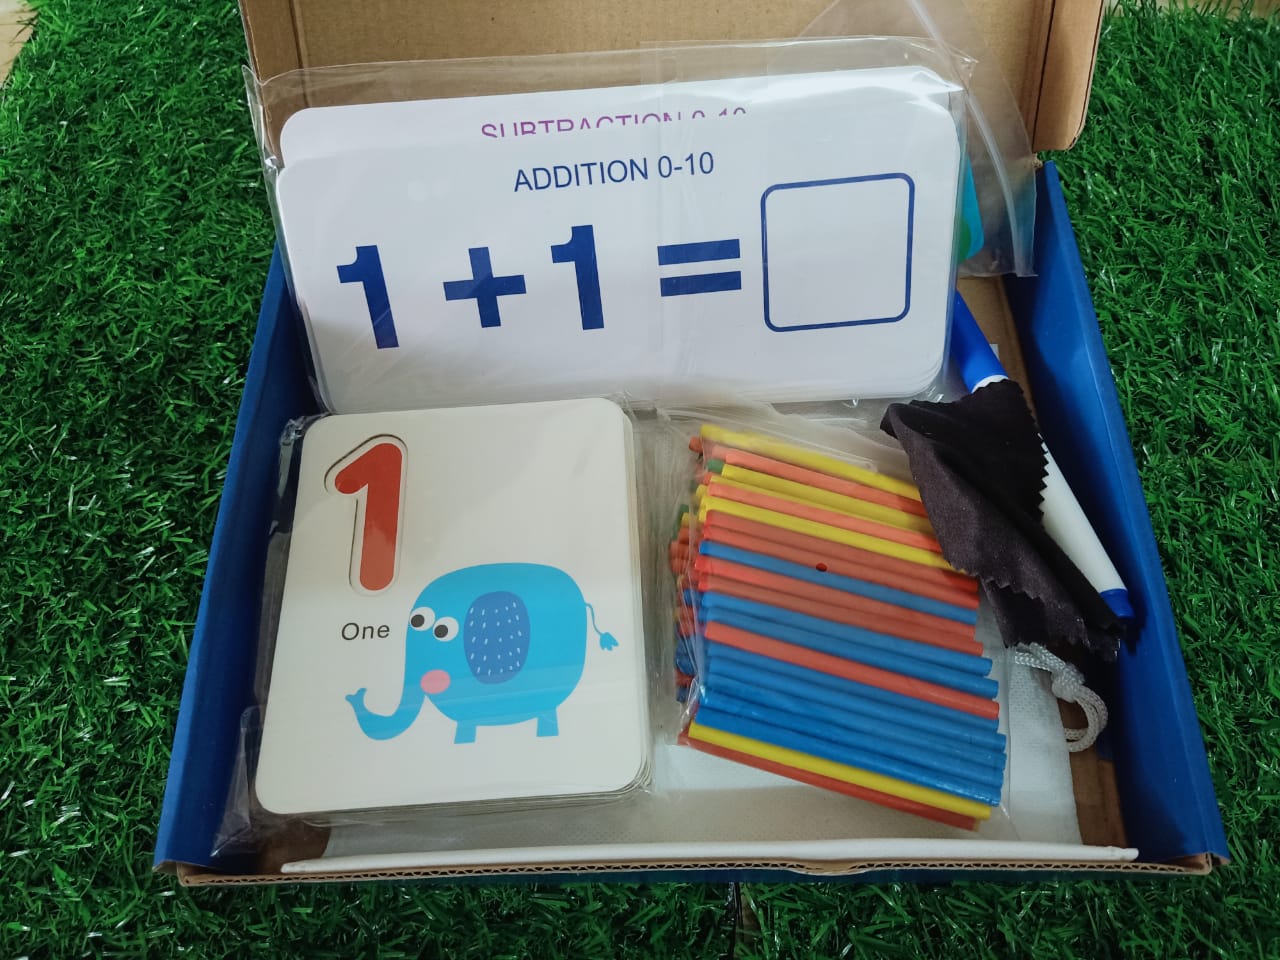 Seeing and Matching Mathematics Learning Toys for Kids-SHTM1106